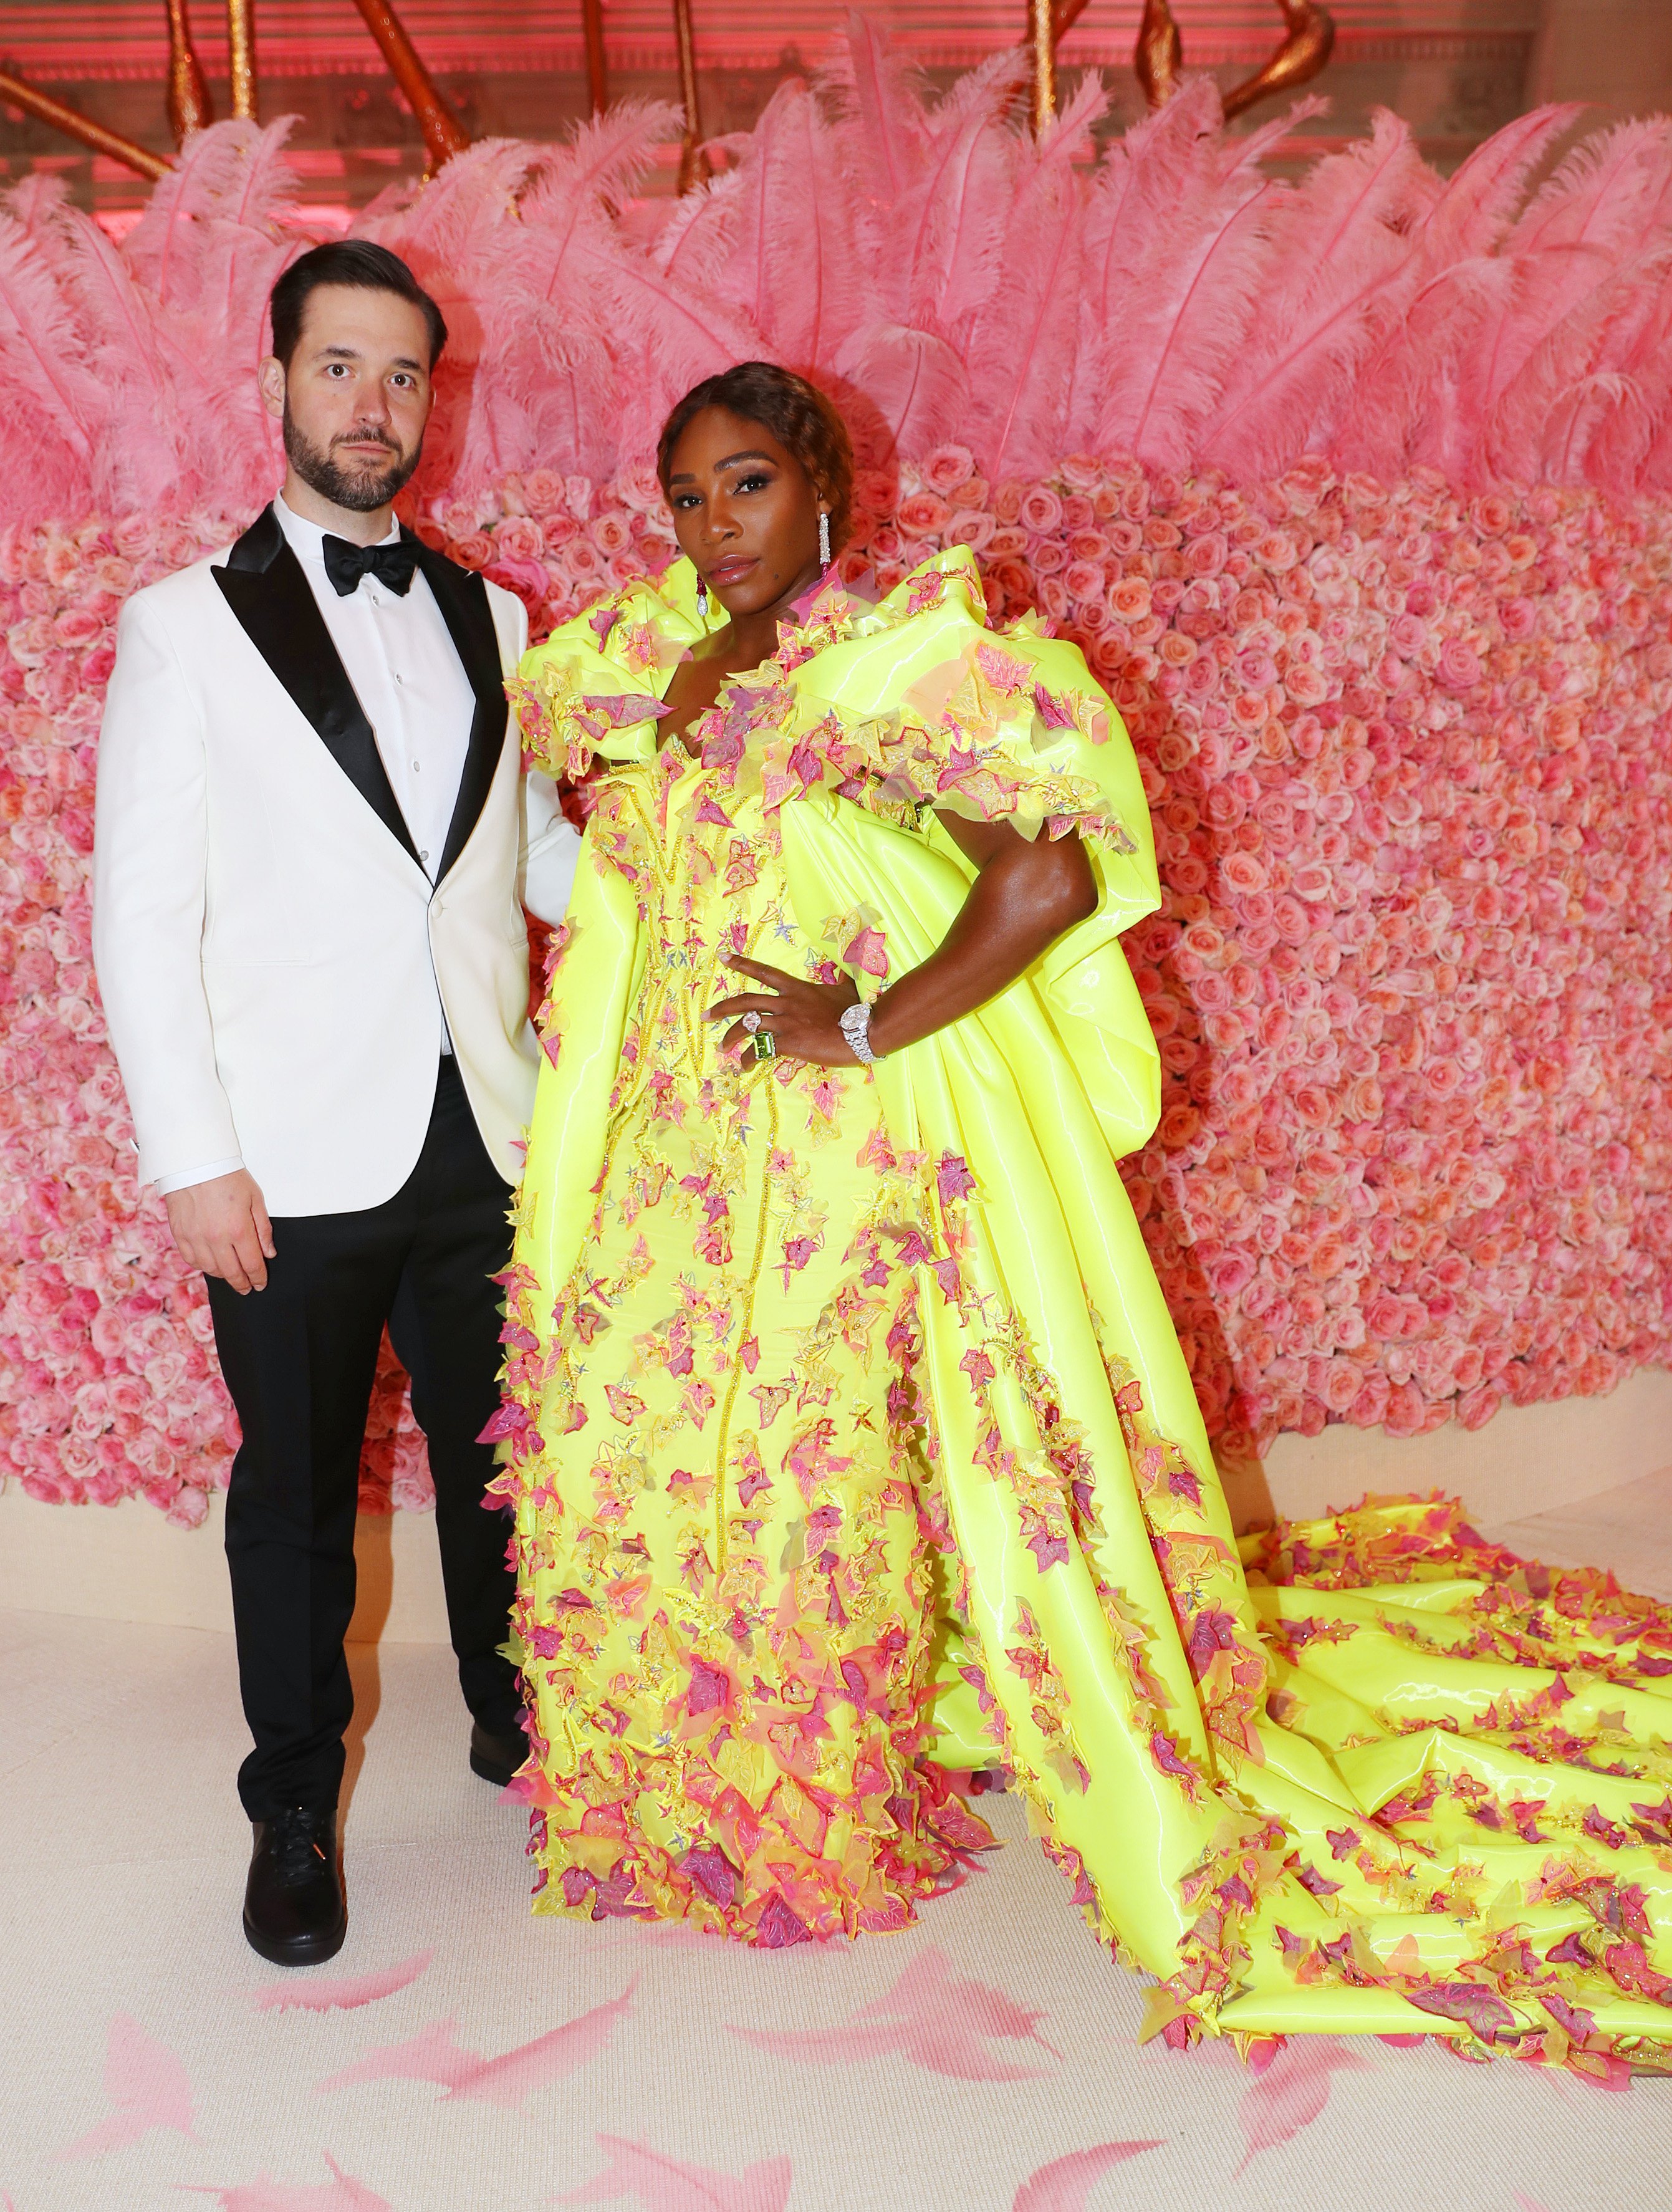 Alexis Ohanian and Serena Williams attend the 2019 Met Gala Celebrating Camp on May 06, 2019. | Photo: Getty Images